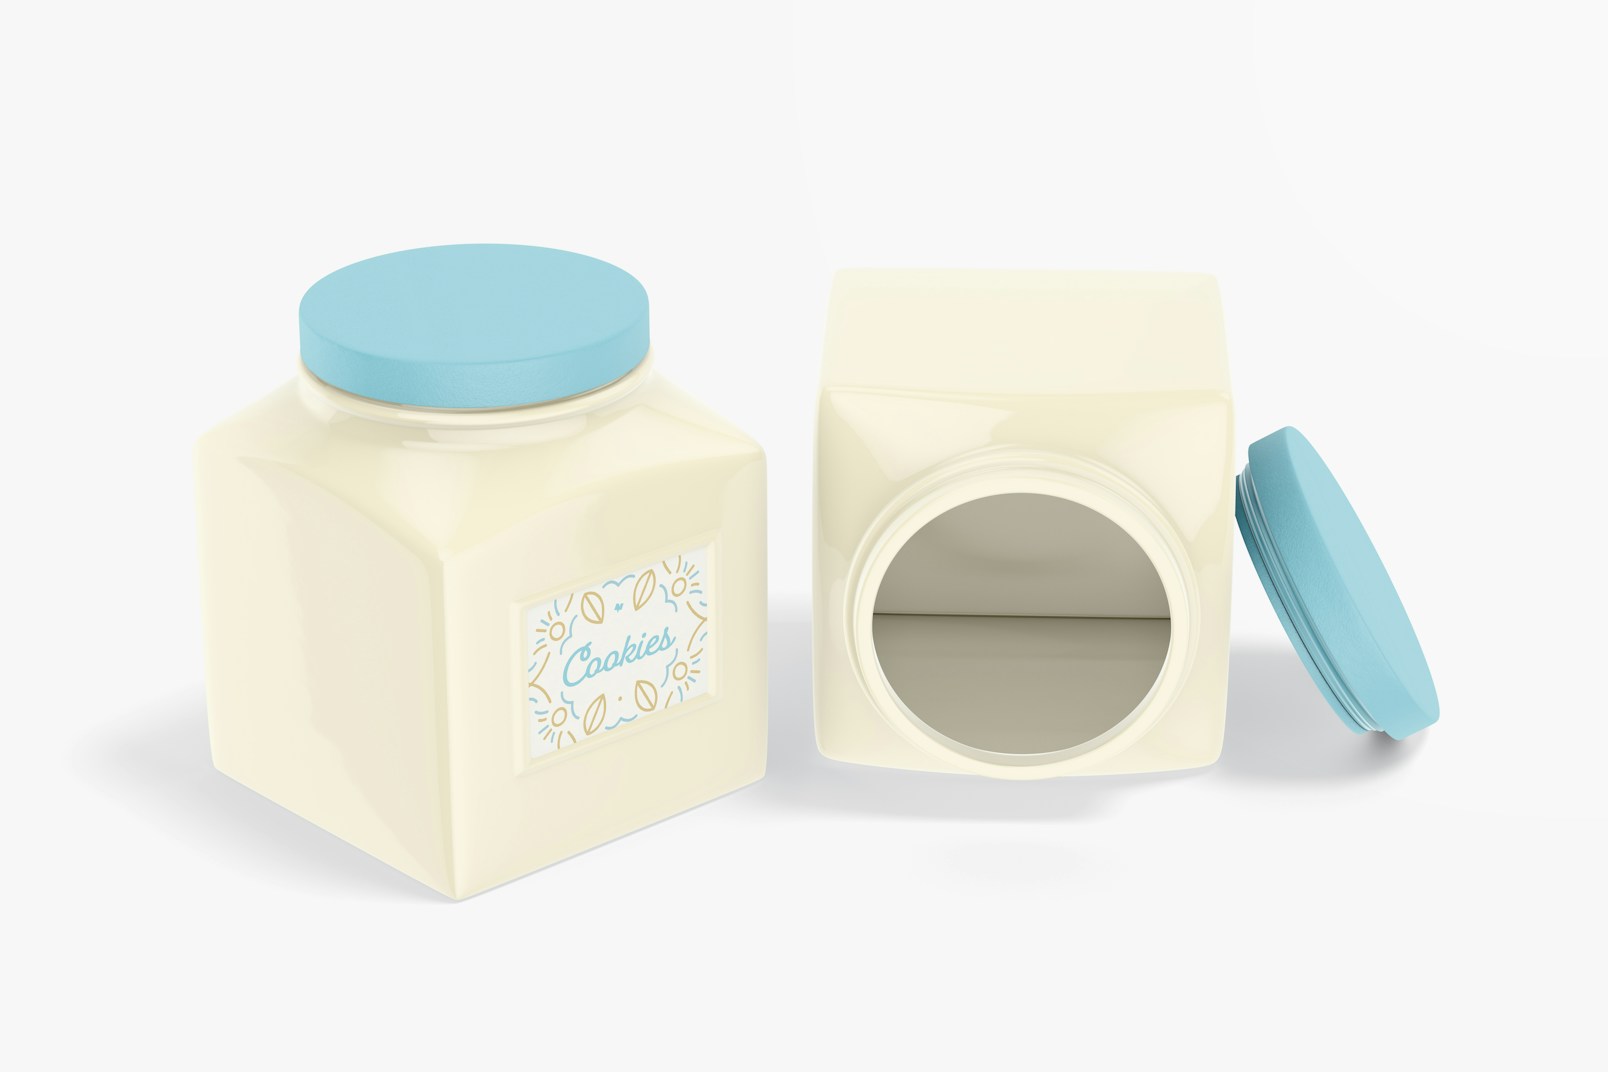 Square Ceramic Canisters Mockup, Opened and Closed